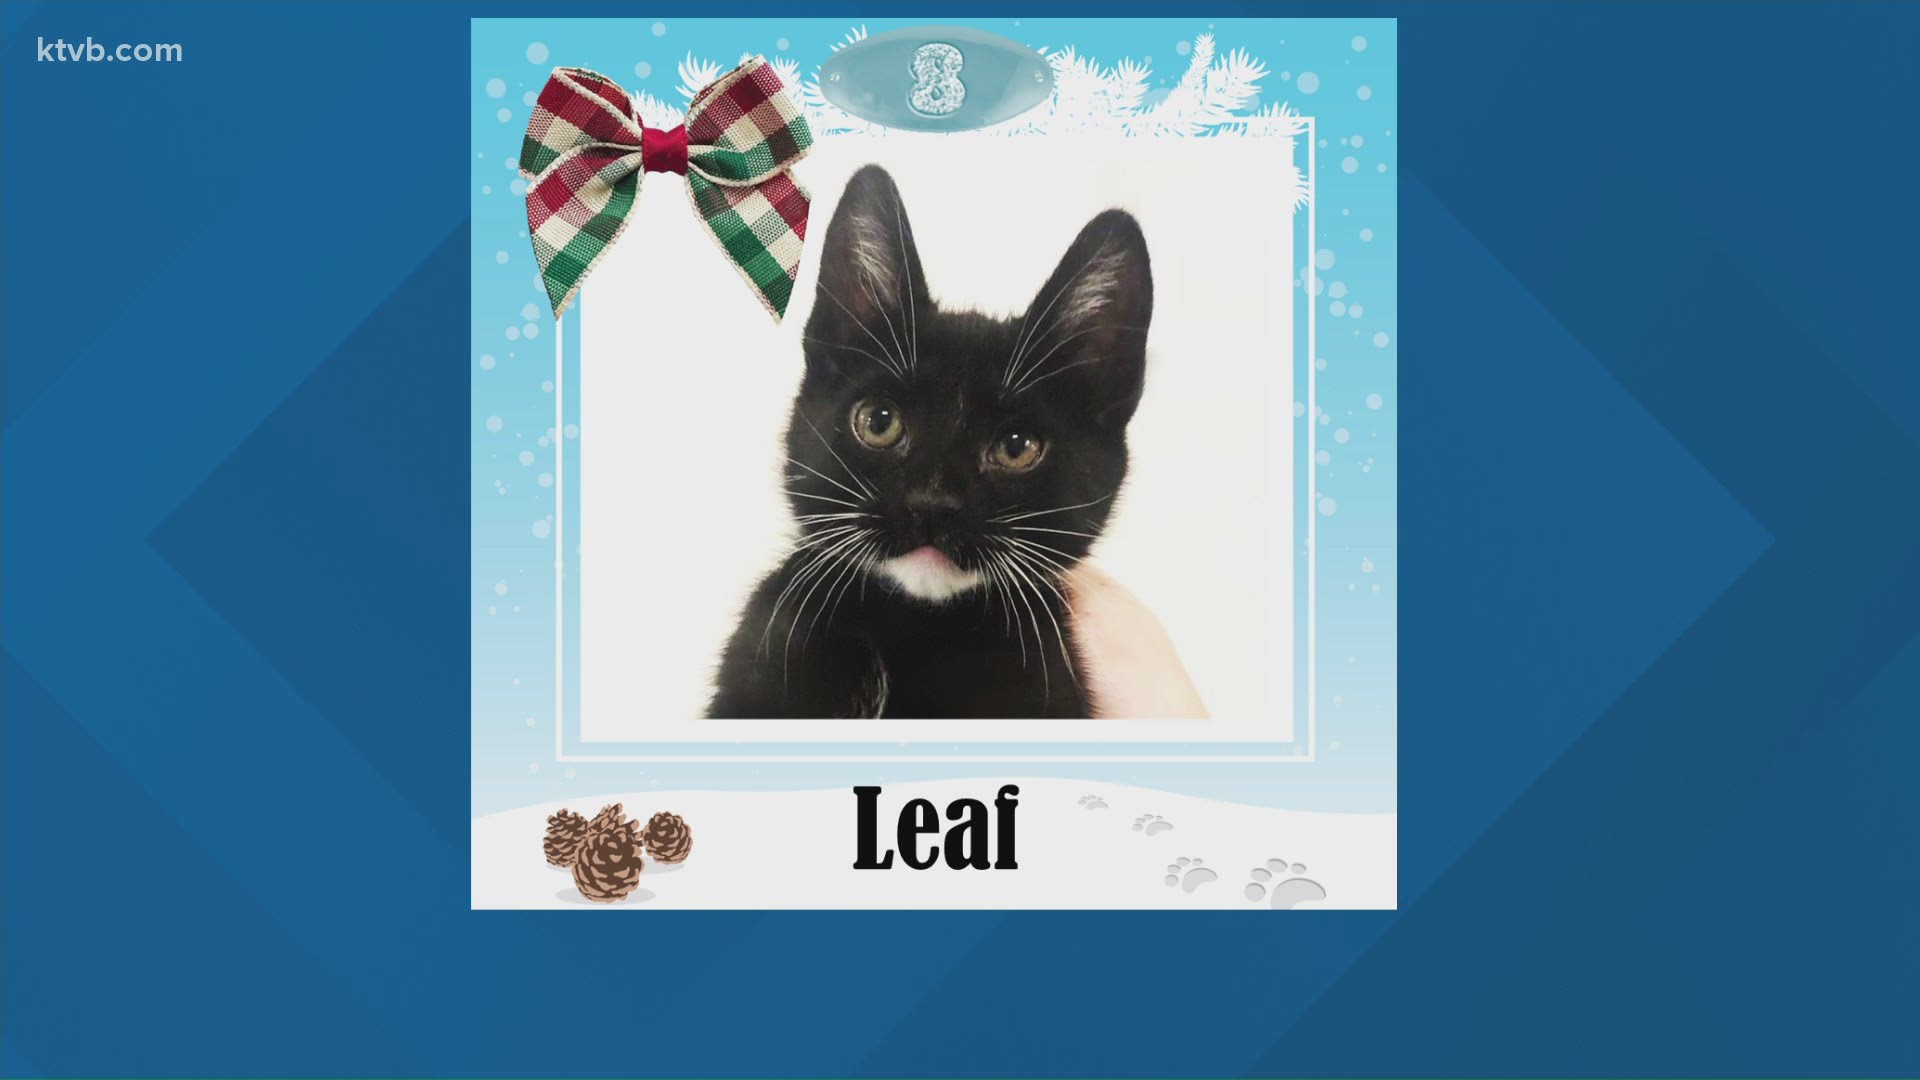 Leaf is quick to purr and play and will make a wonderful addition to your forever home.